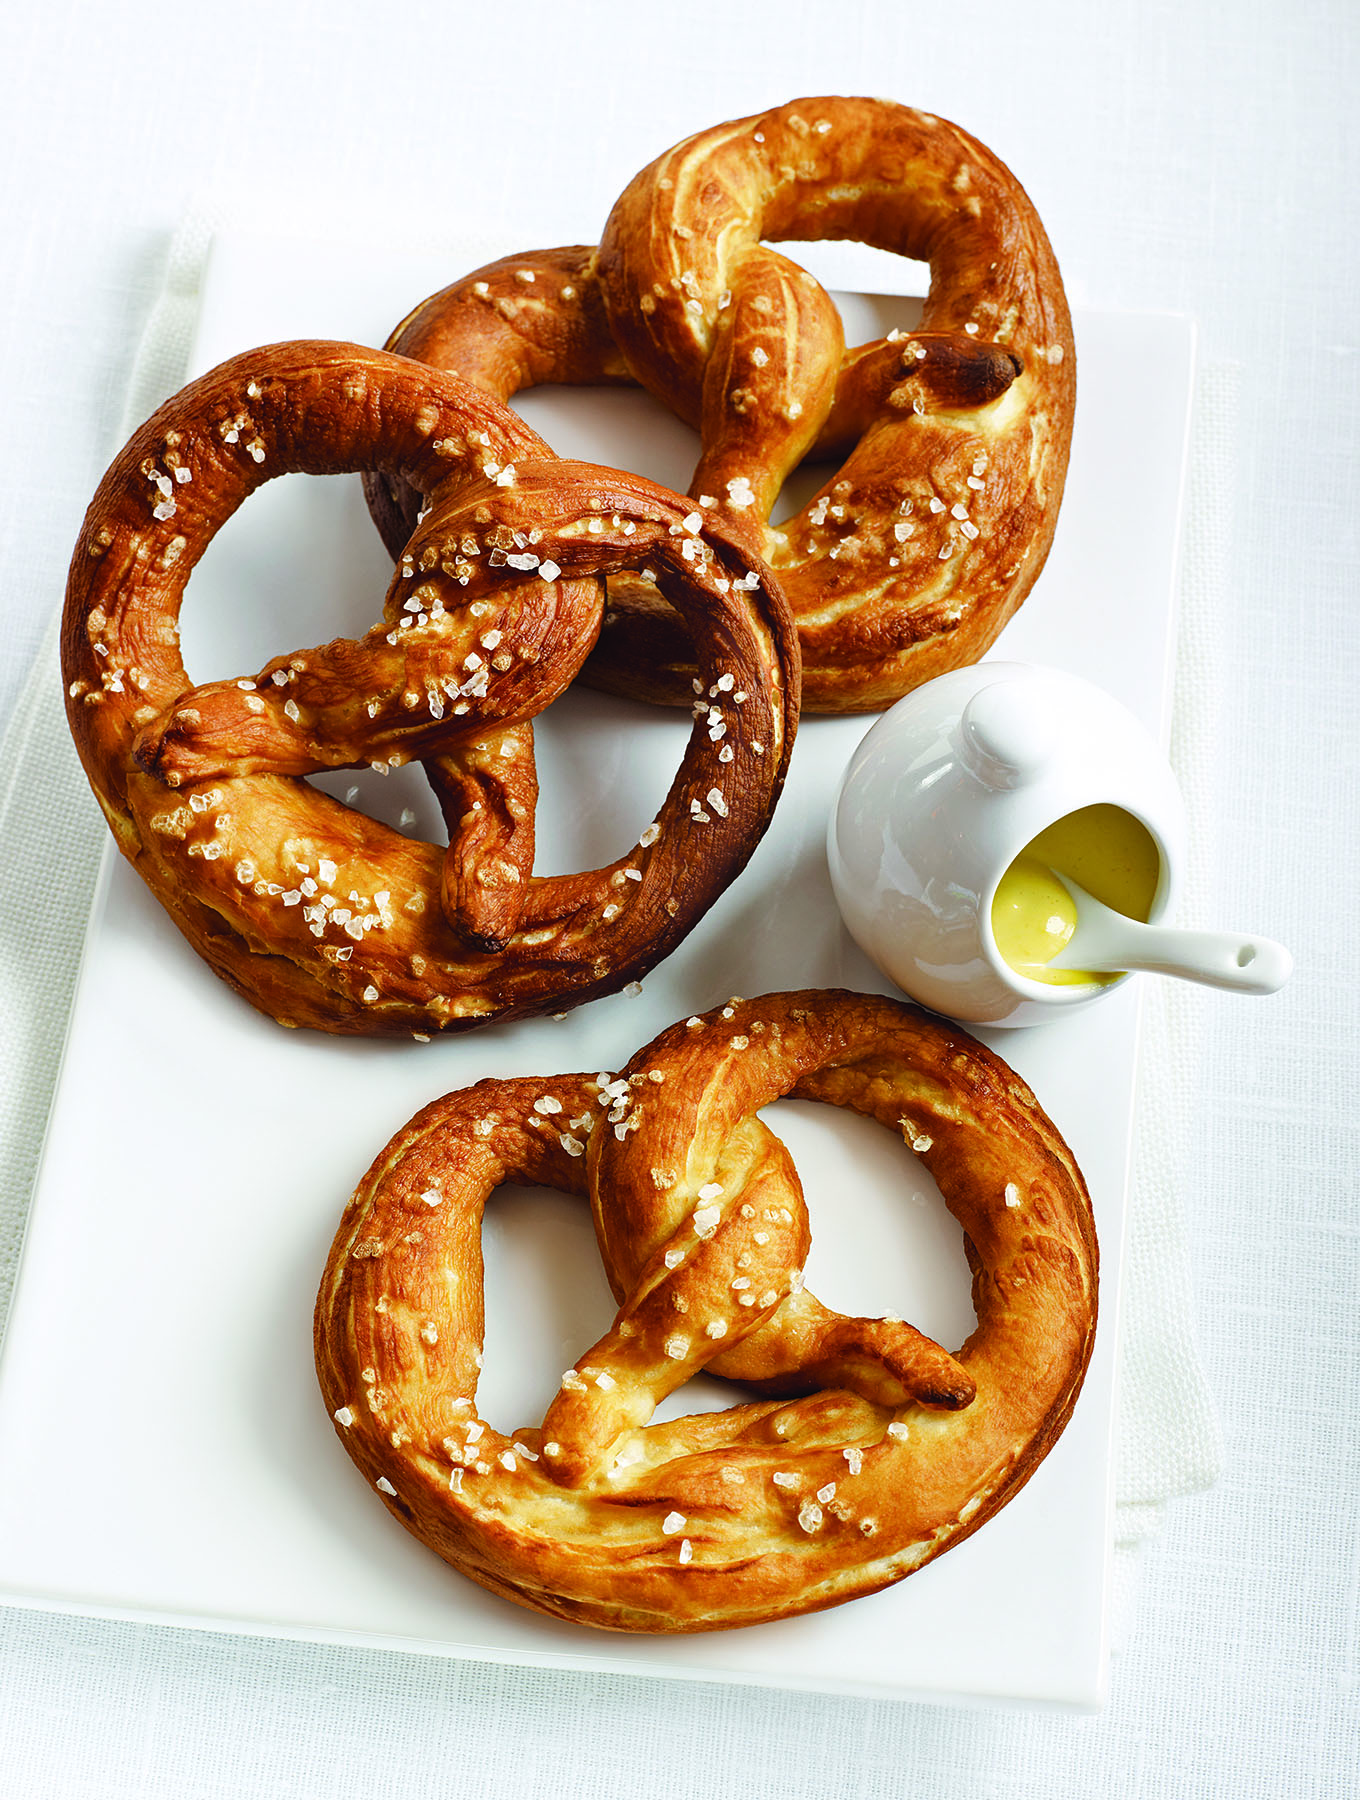 The Twisted History of the Pretzel - Part 3 - More than Beer and